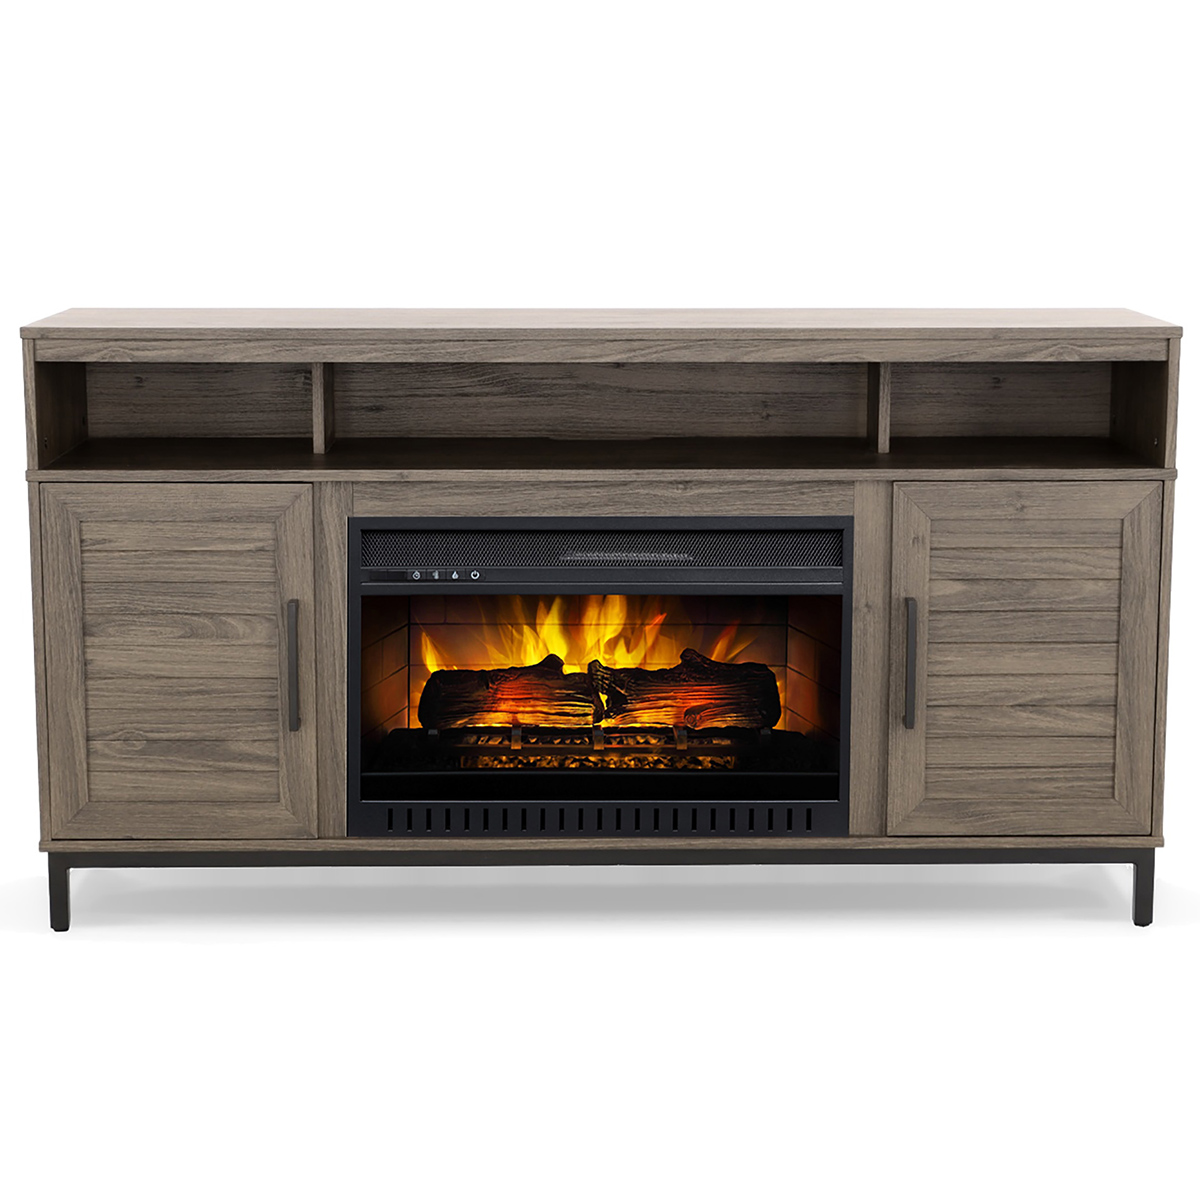 Whalen 60in. Fireplace TV Console